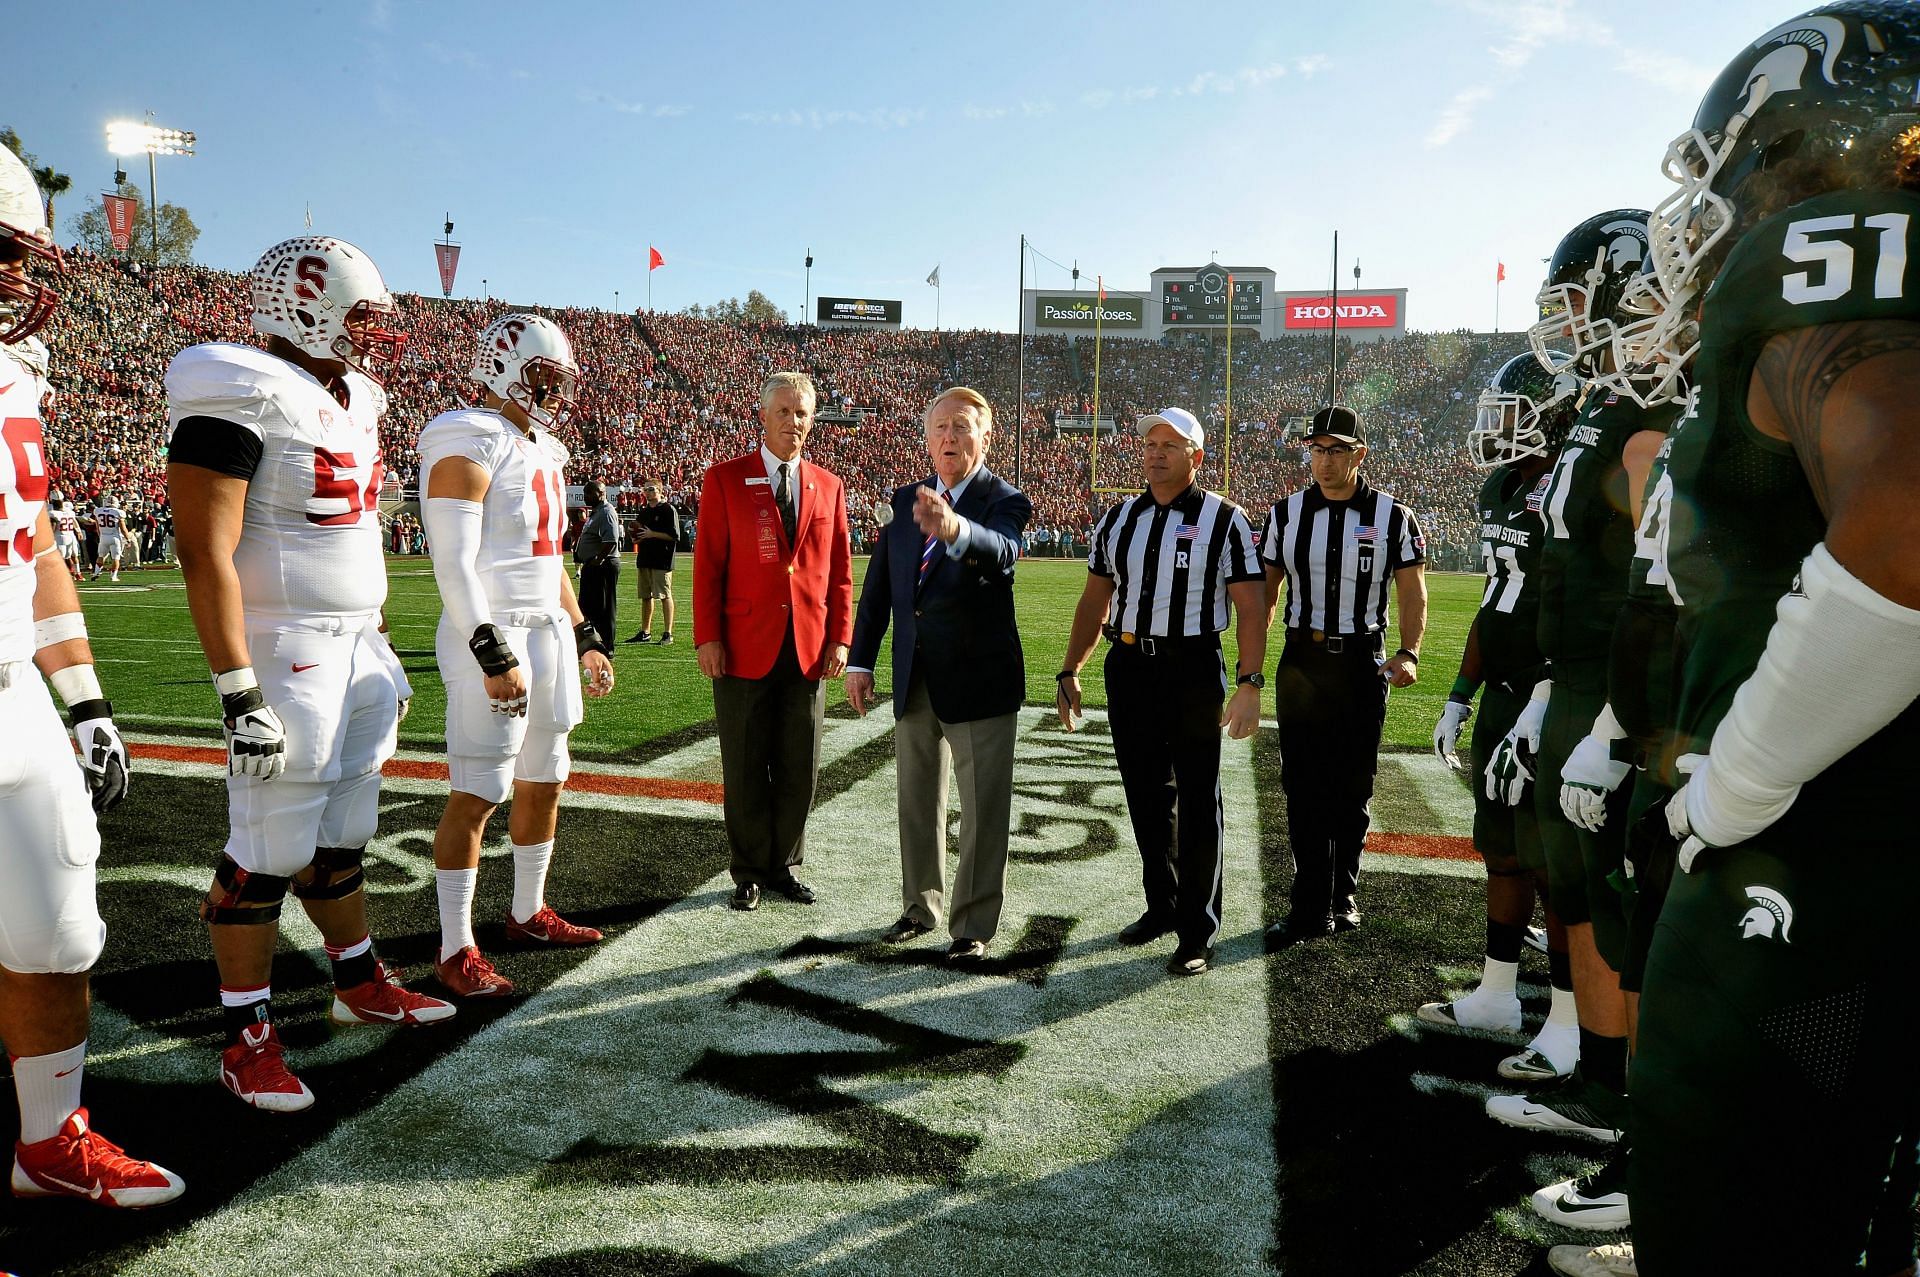 The 100th Rose Bowl Game - Stanford v Michigan State